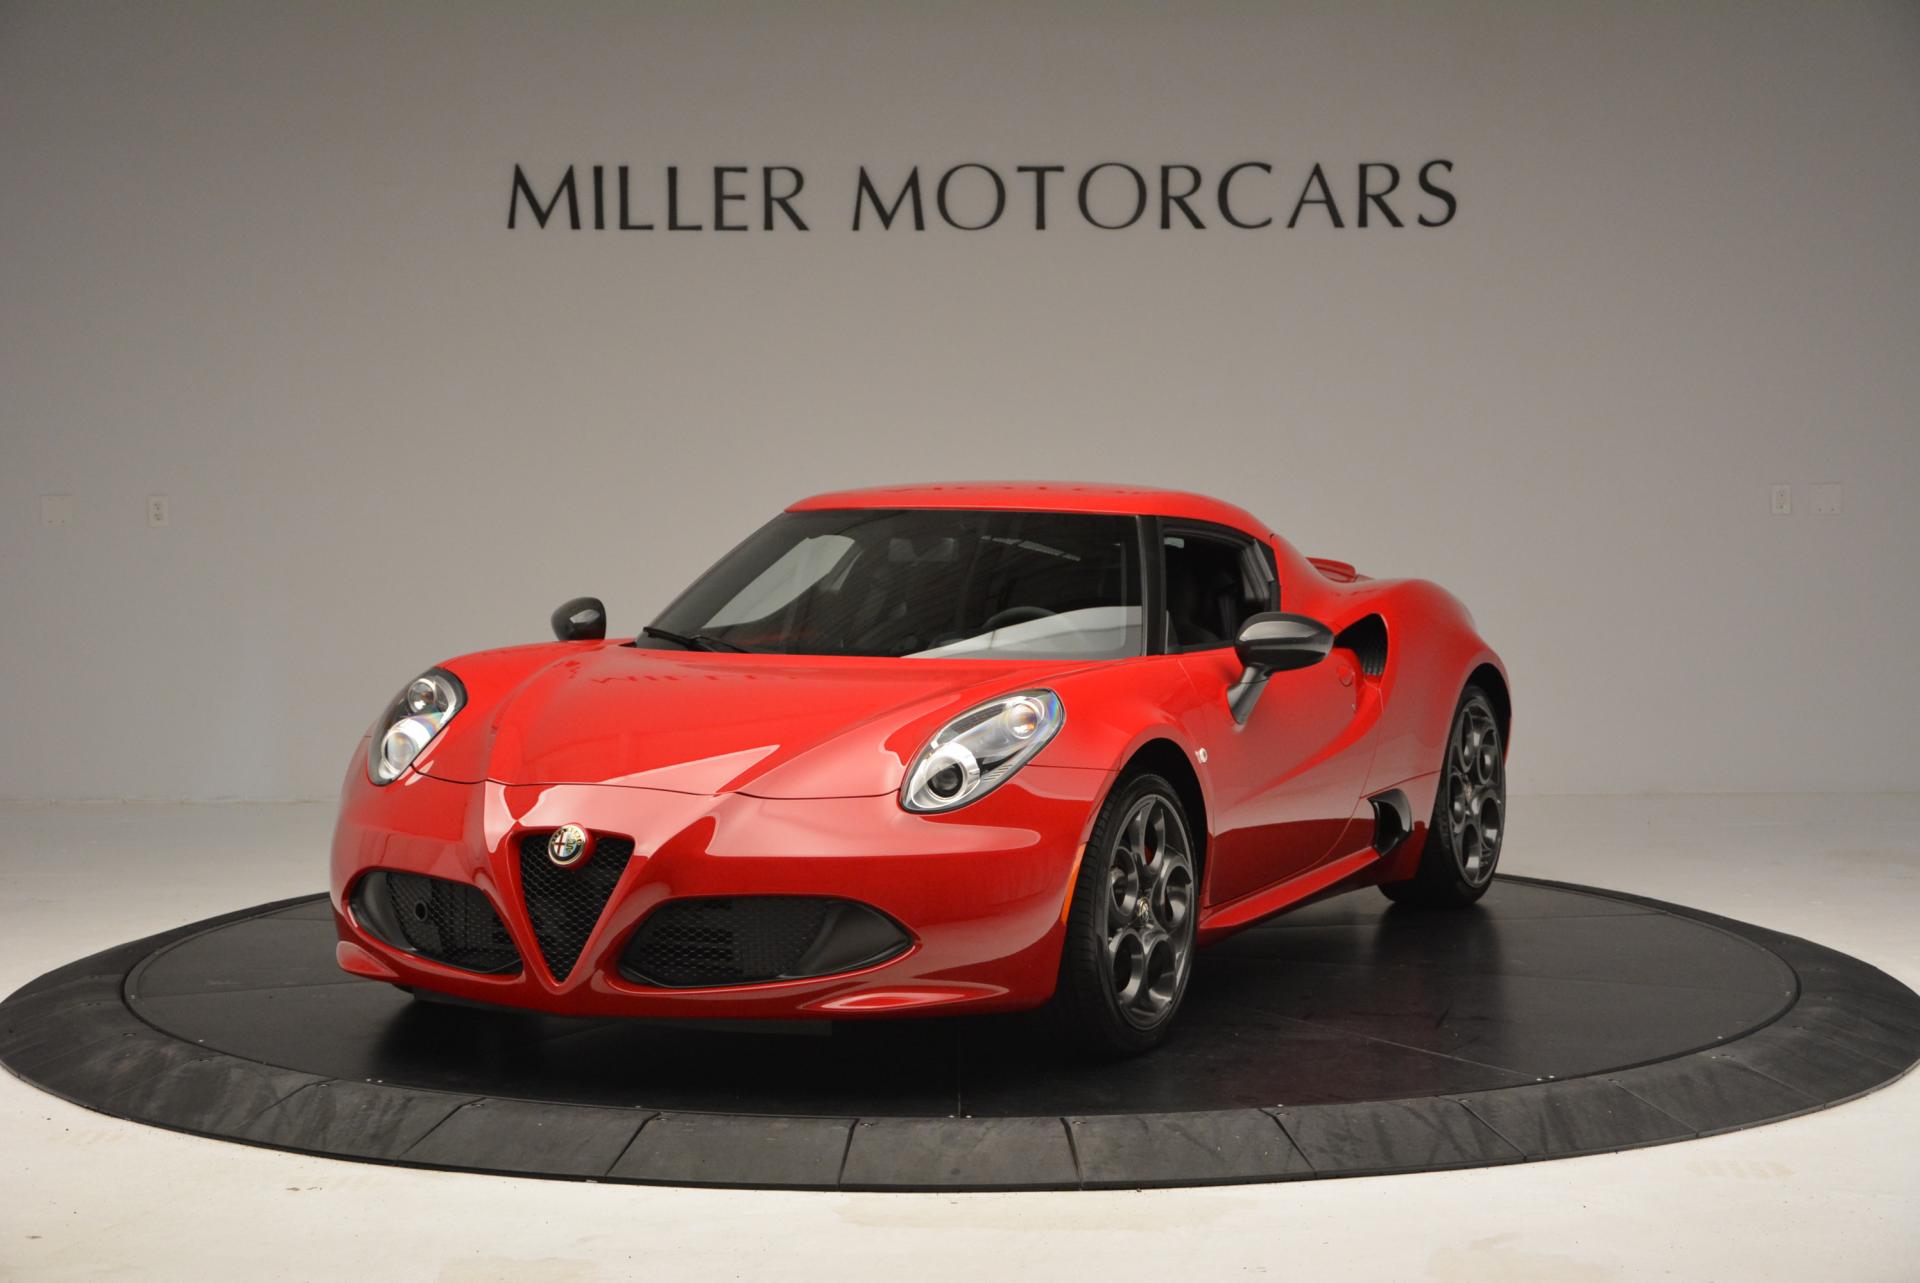 Used 2015 Alfa Romeo 4C for sale Sold at Bentley Greenwich in Greenwich CT 06830 1